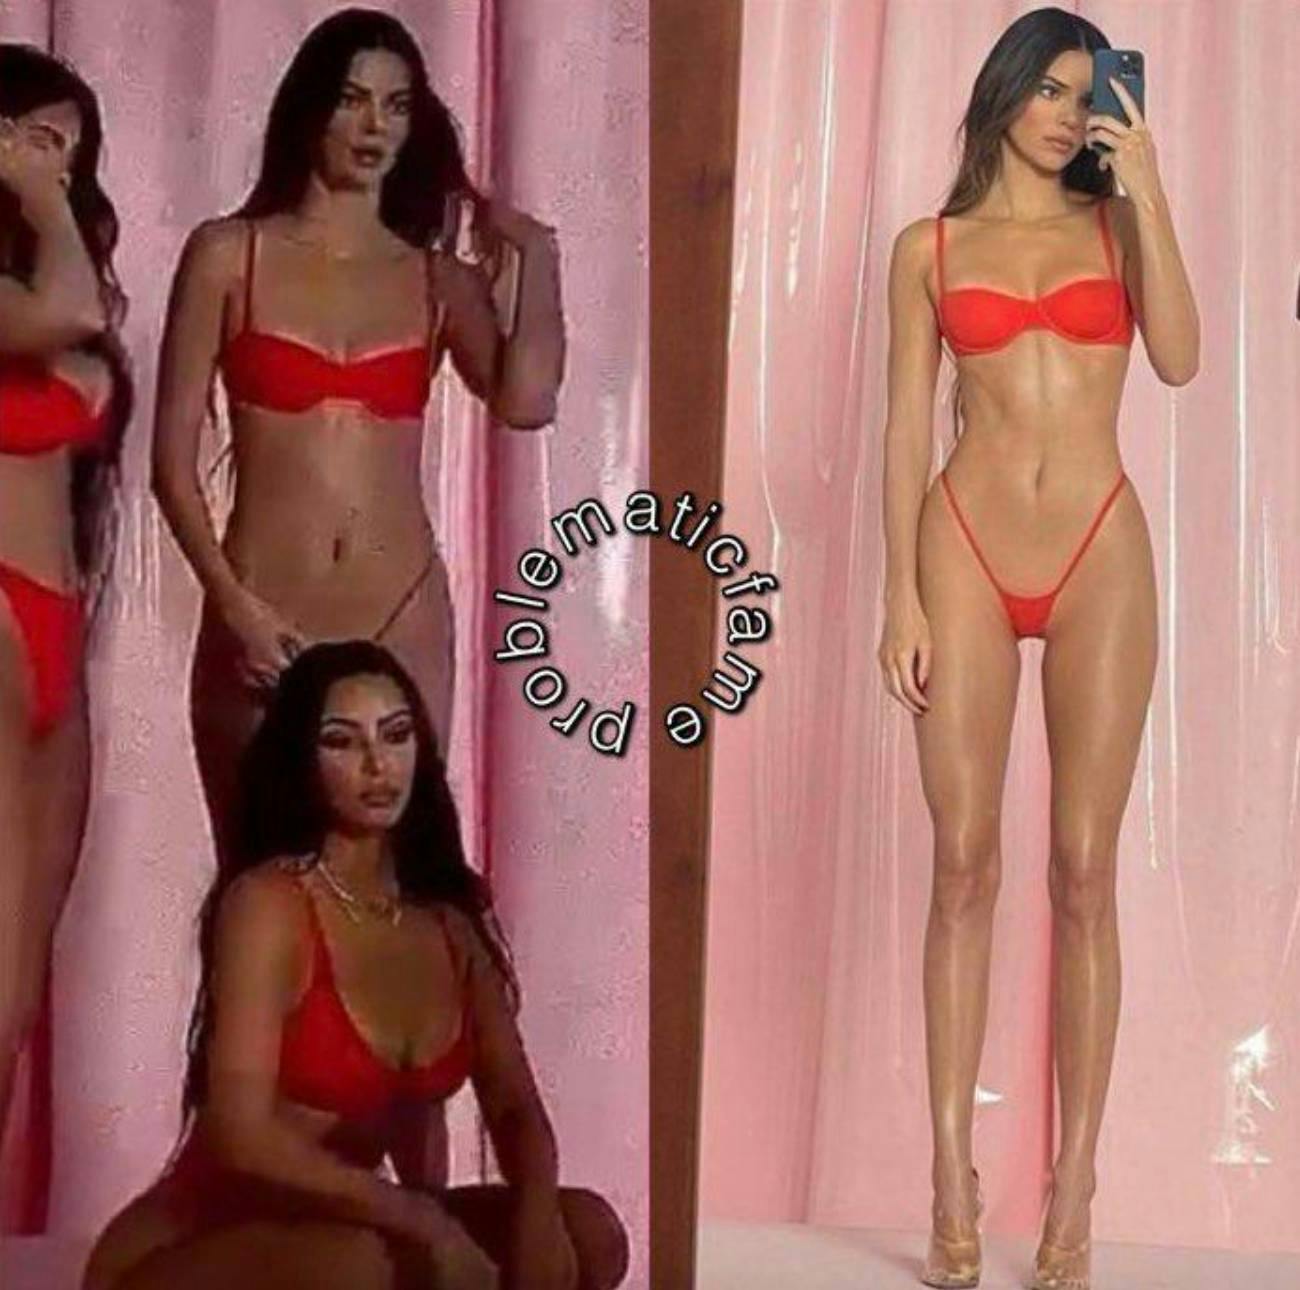 A still from the video side by side with the photograph, the still show less thin and more realistic proportions